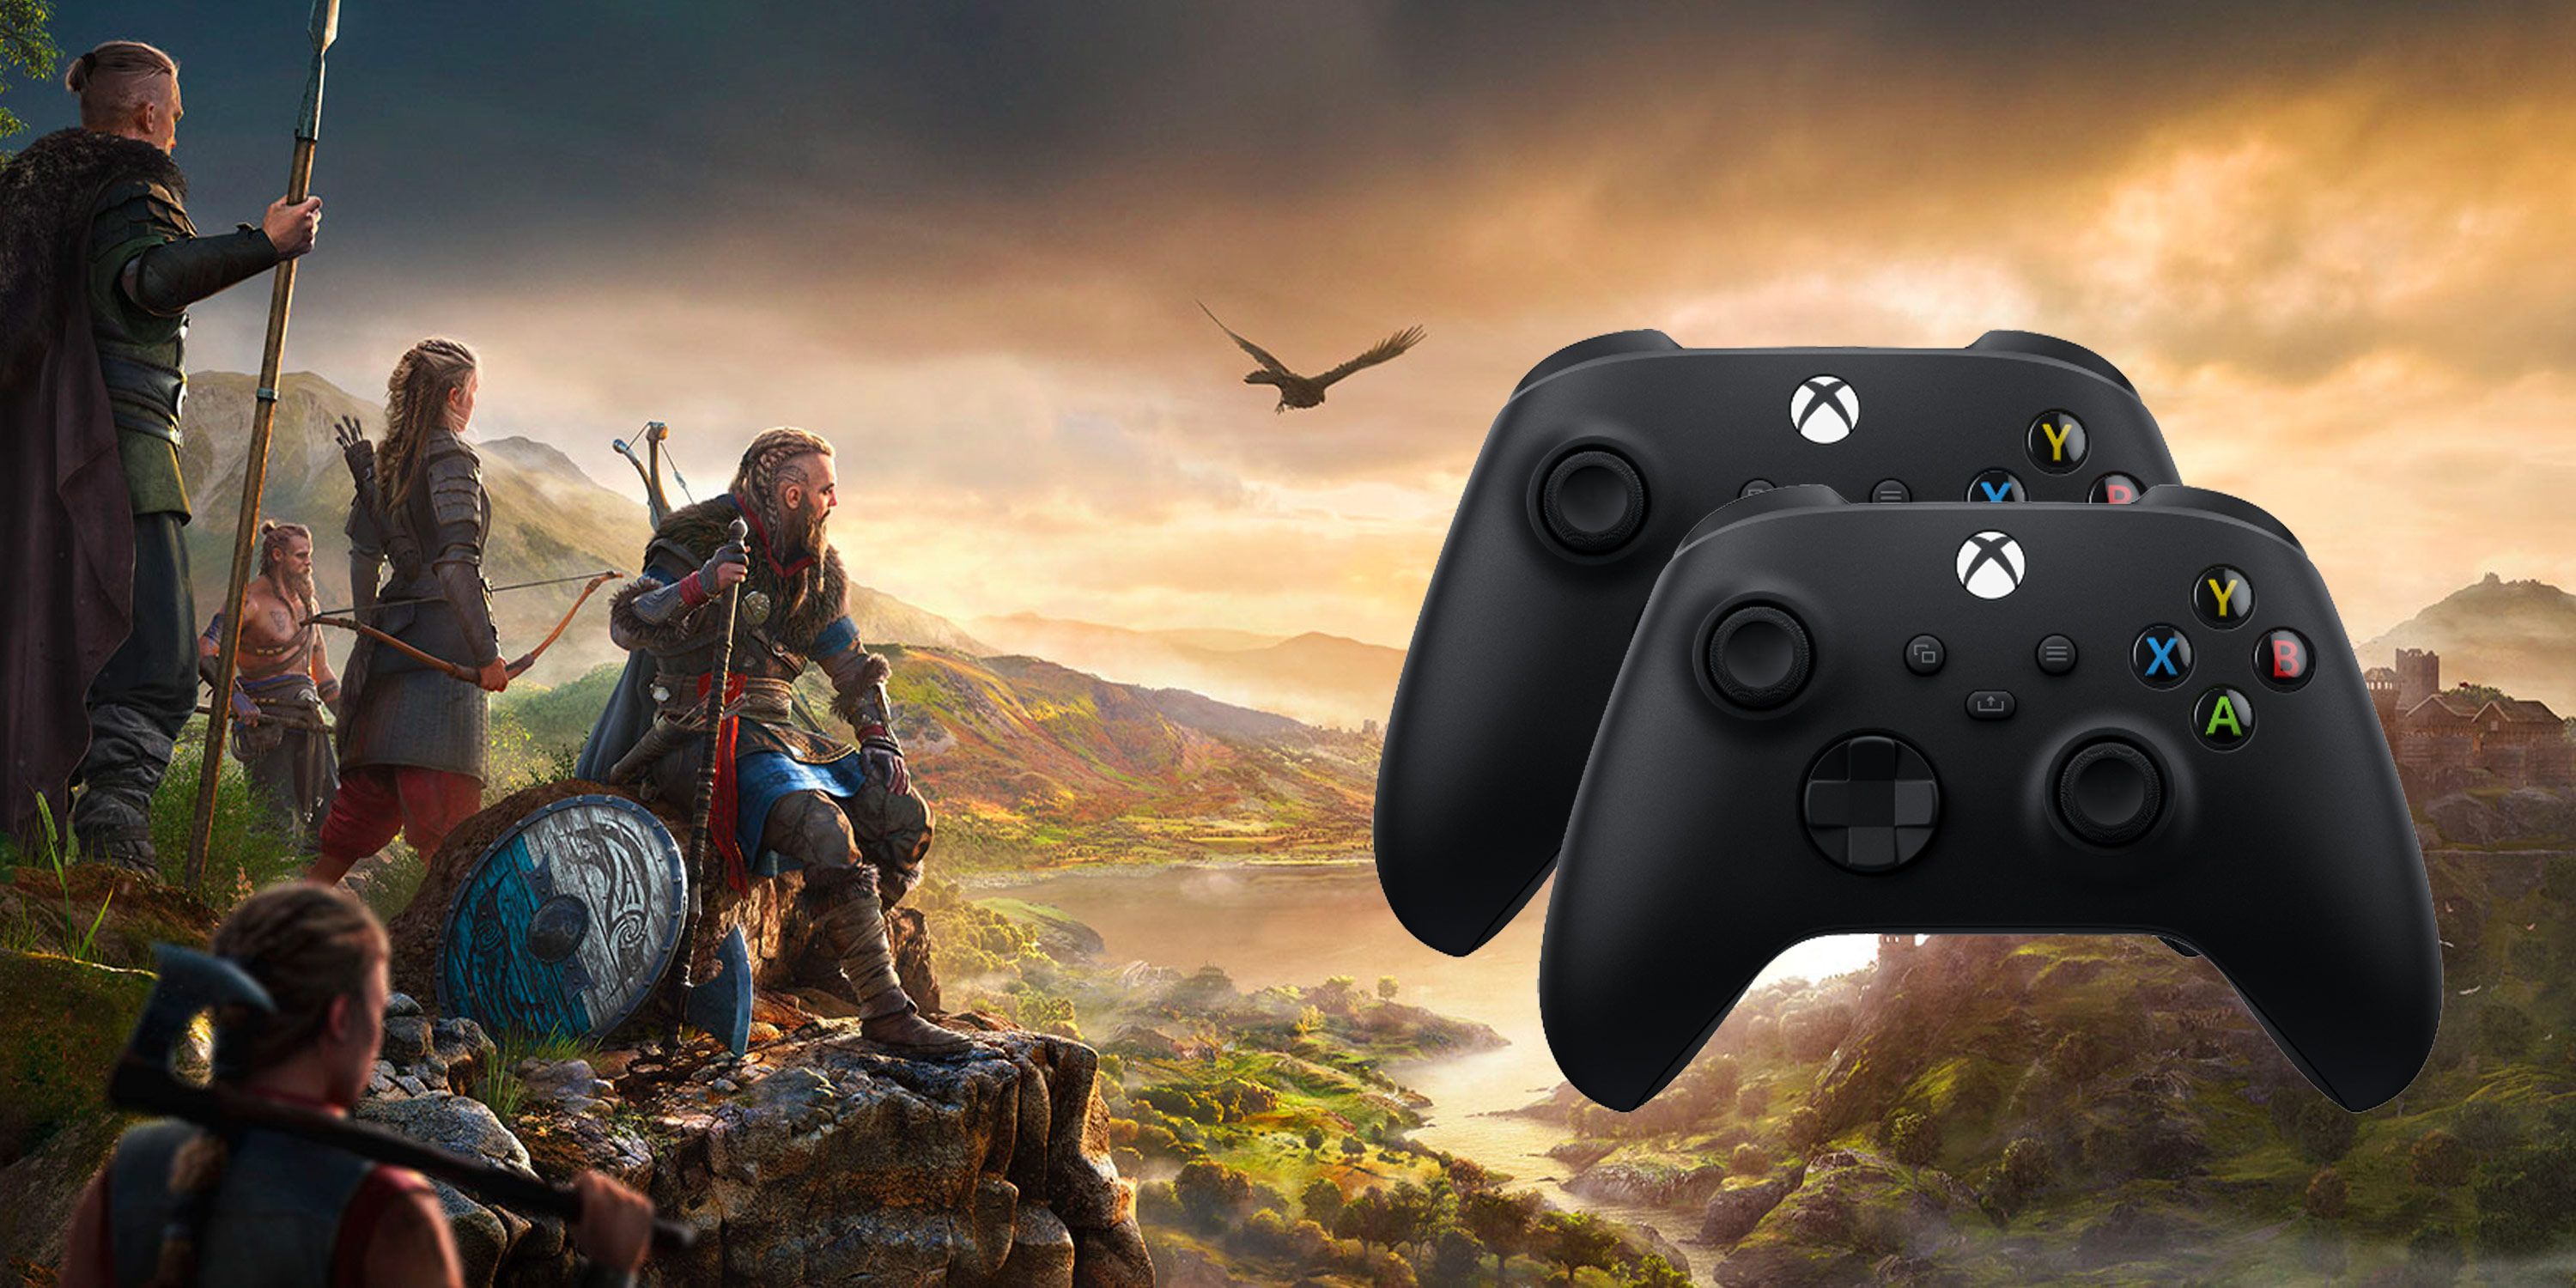 15 Best How to remote play xbox one on pc with HD Quality Images